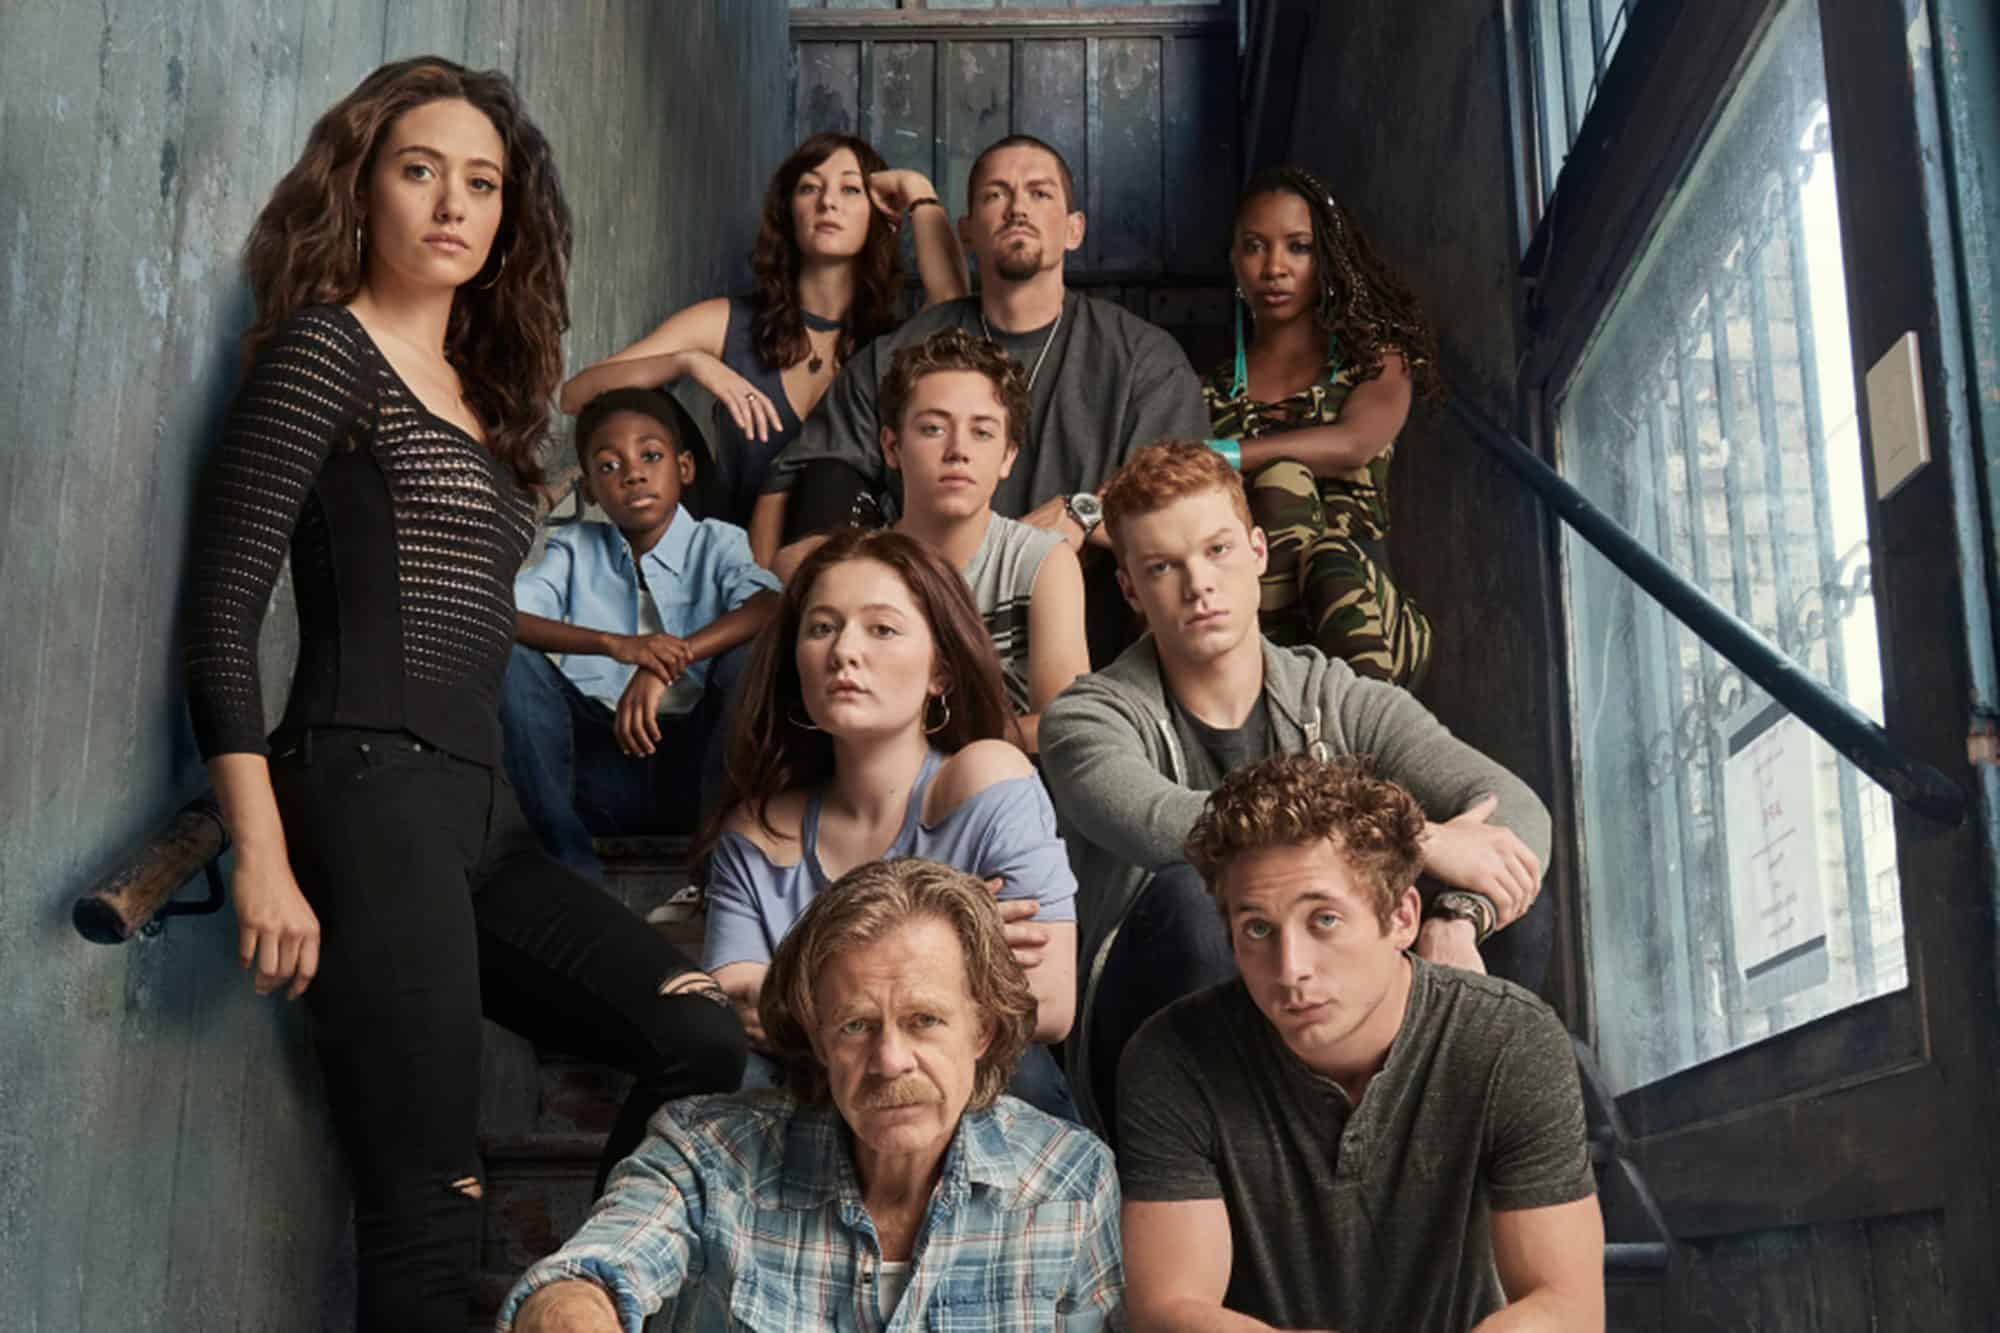 Cast of the show, Shameless (Credits: Showtime)